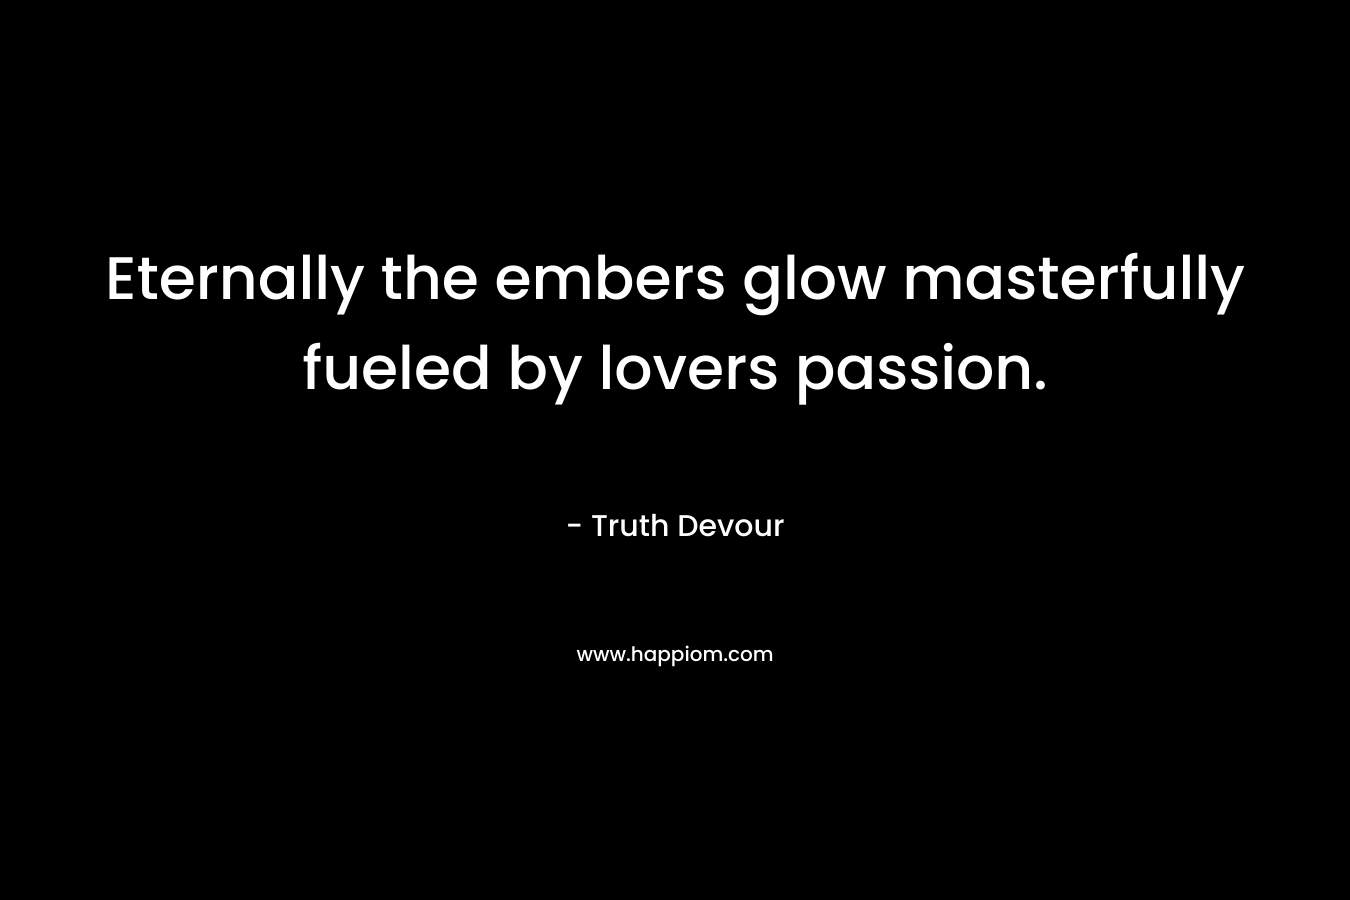 Eternally the embers glow masterfully fueled by lovers passion.